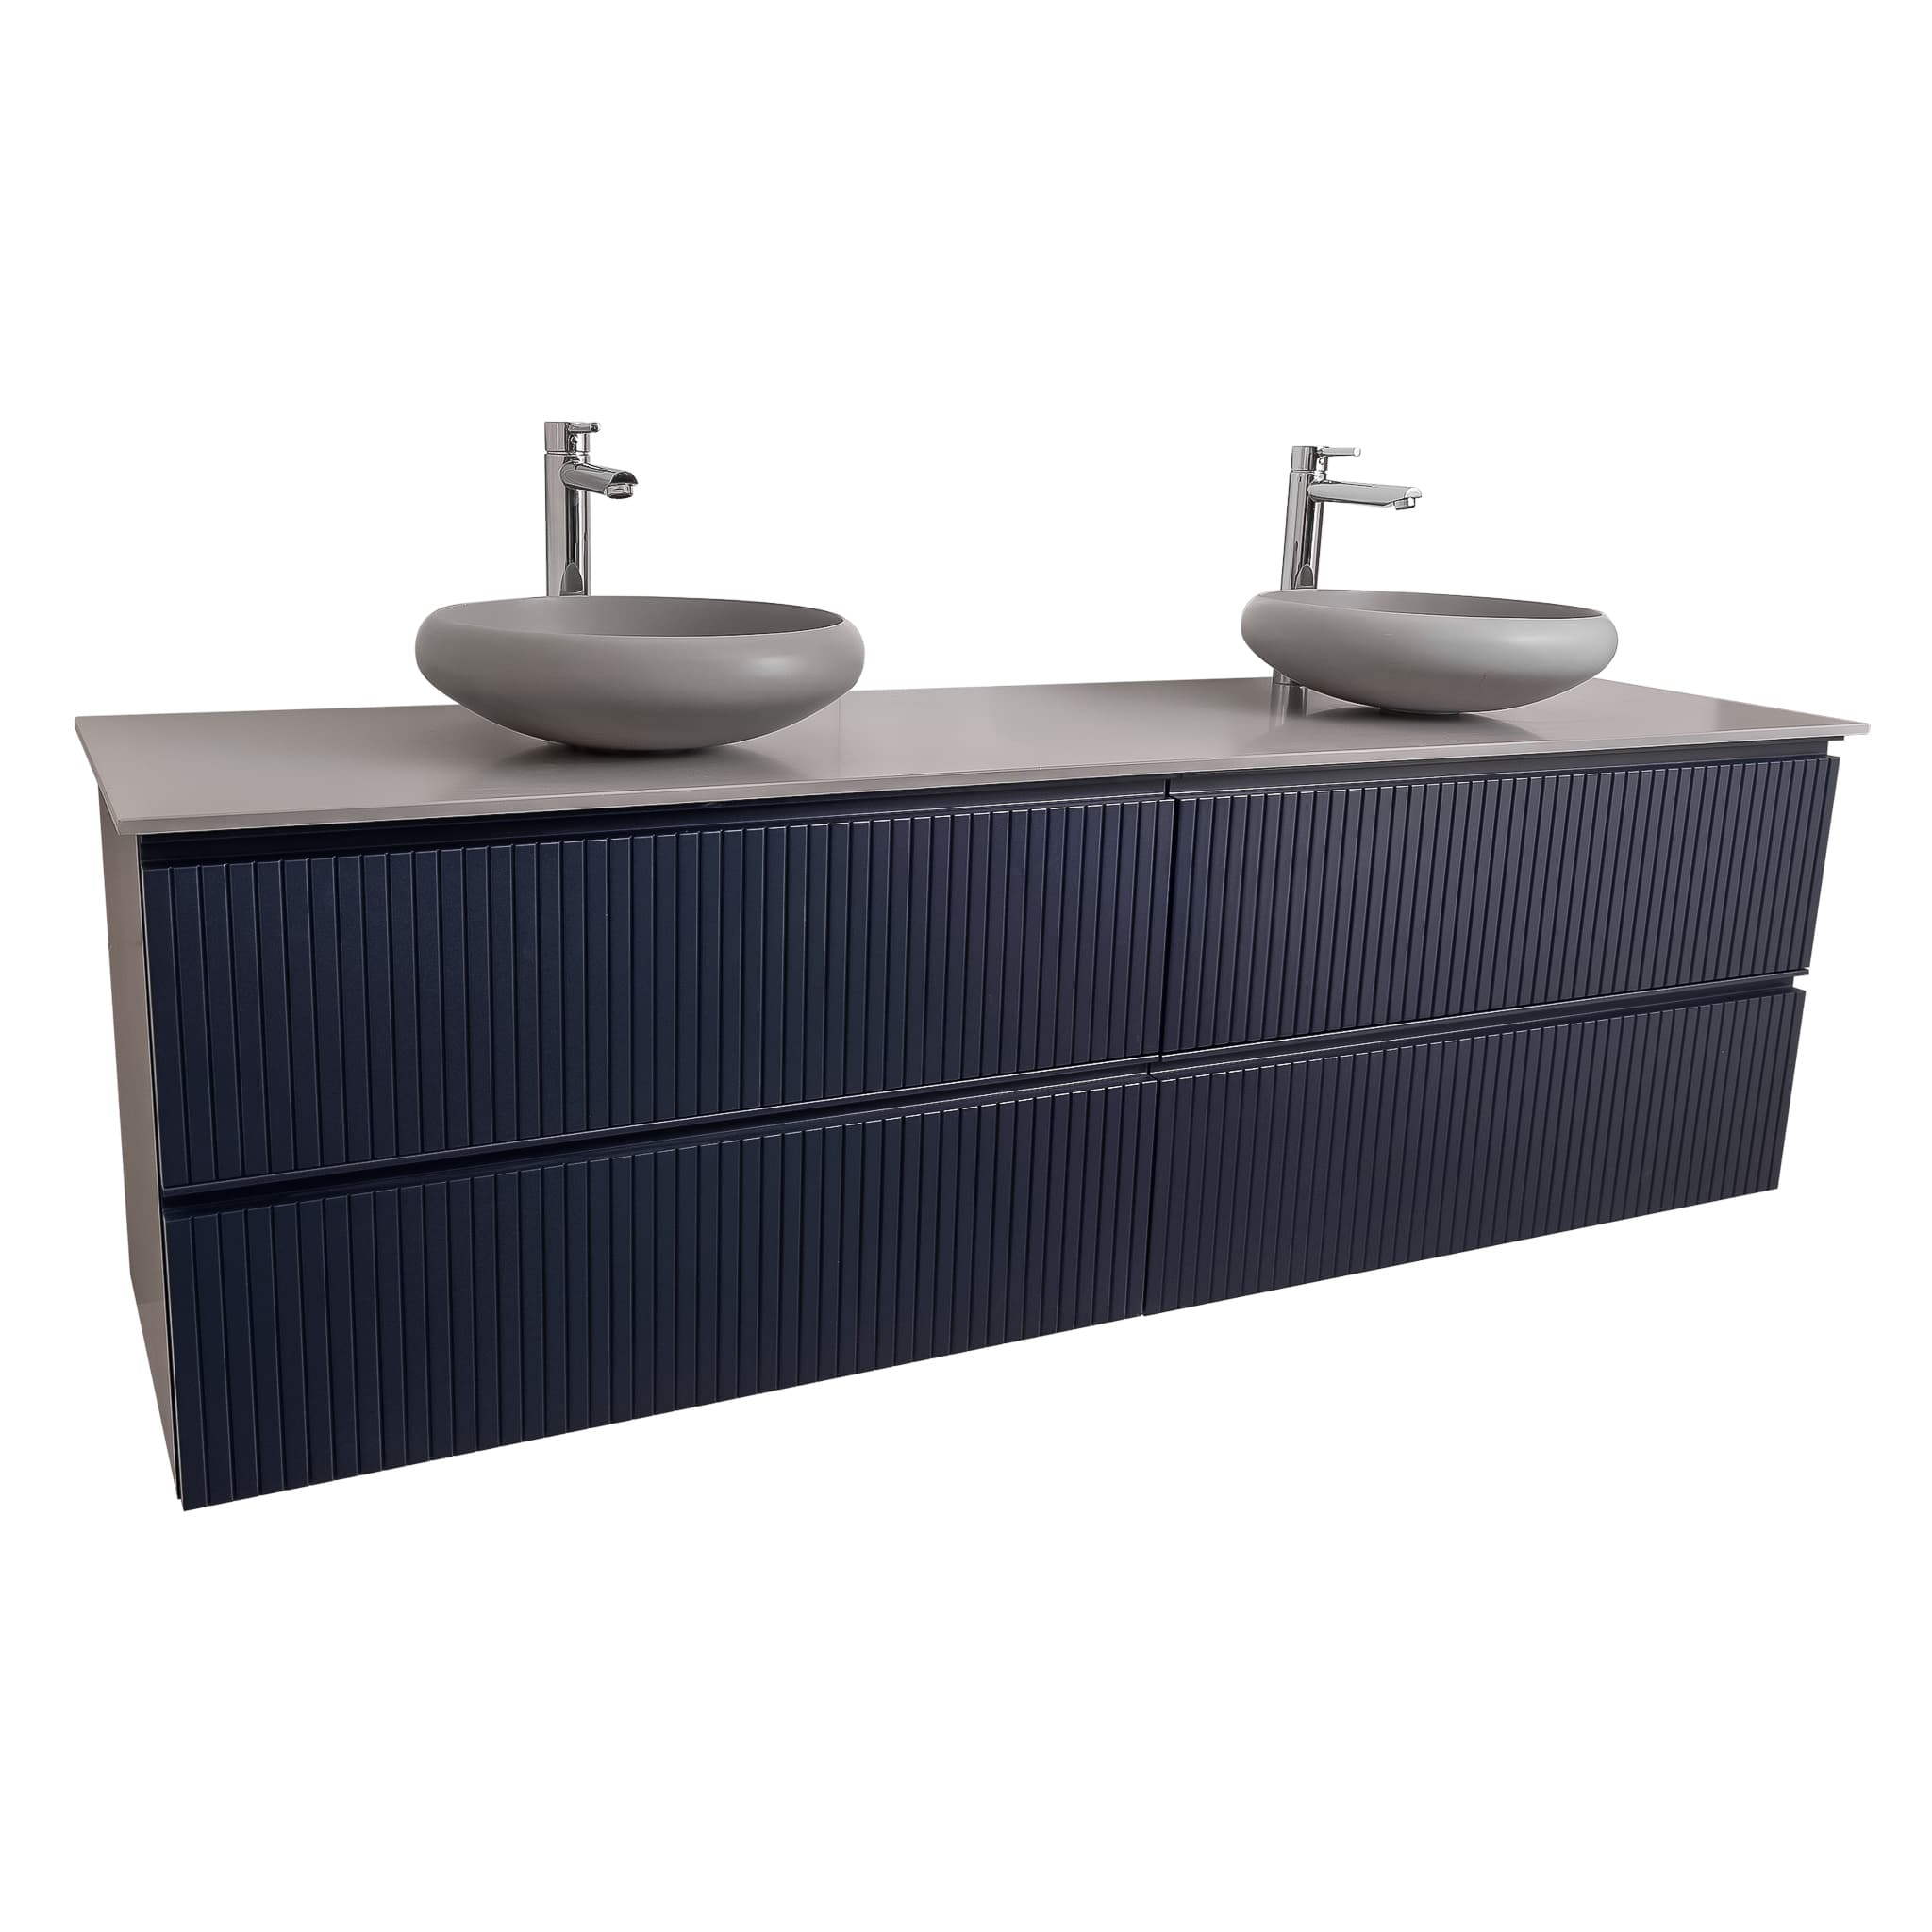 Ares 72 Matte Navy Blue Cabinet, Solid Surface Flat Grey Counter And Two Round Solid Surface Grey Basin 1153, Wall Mounted Modern Vanity Set